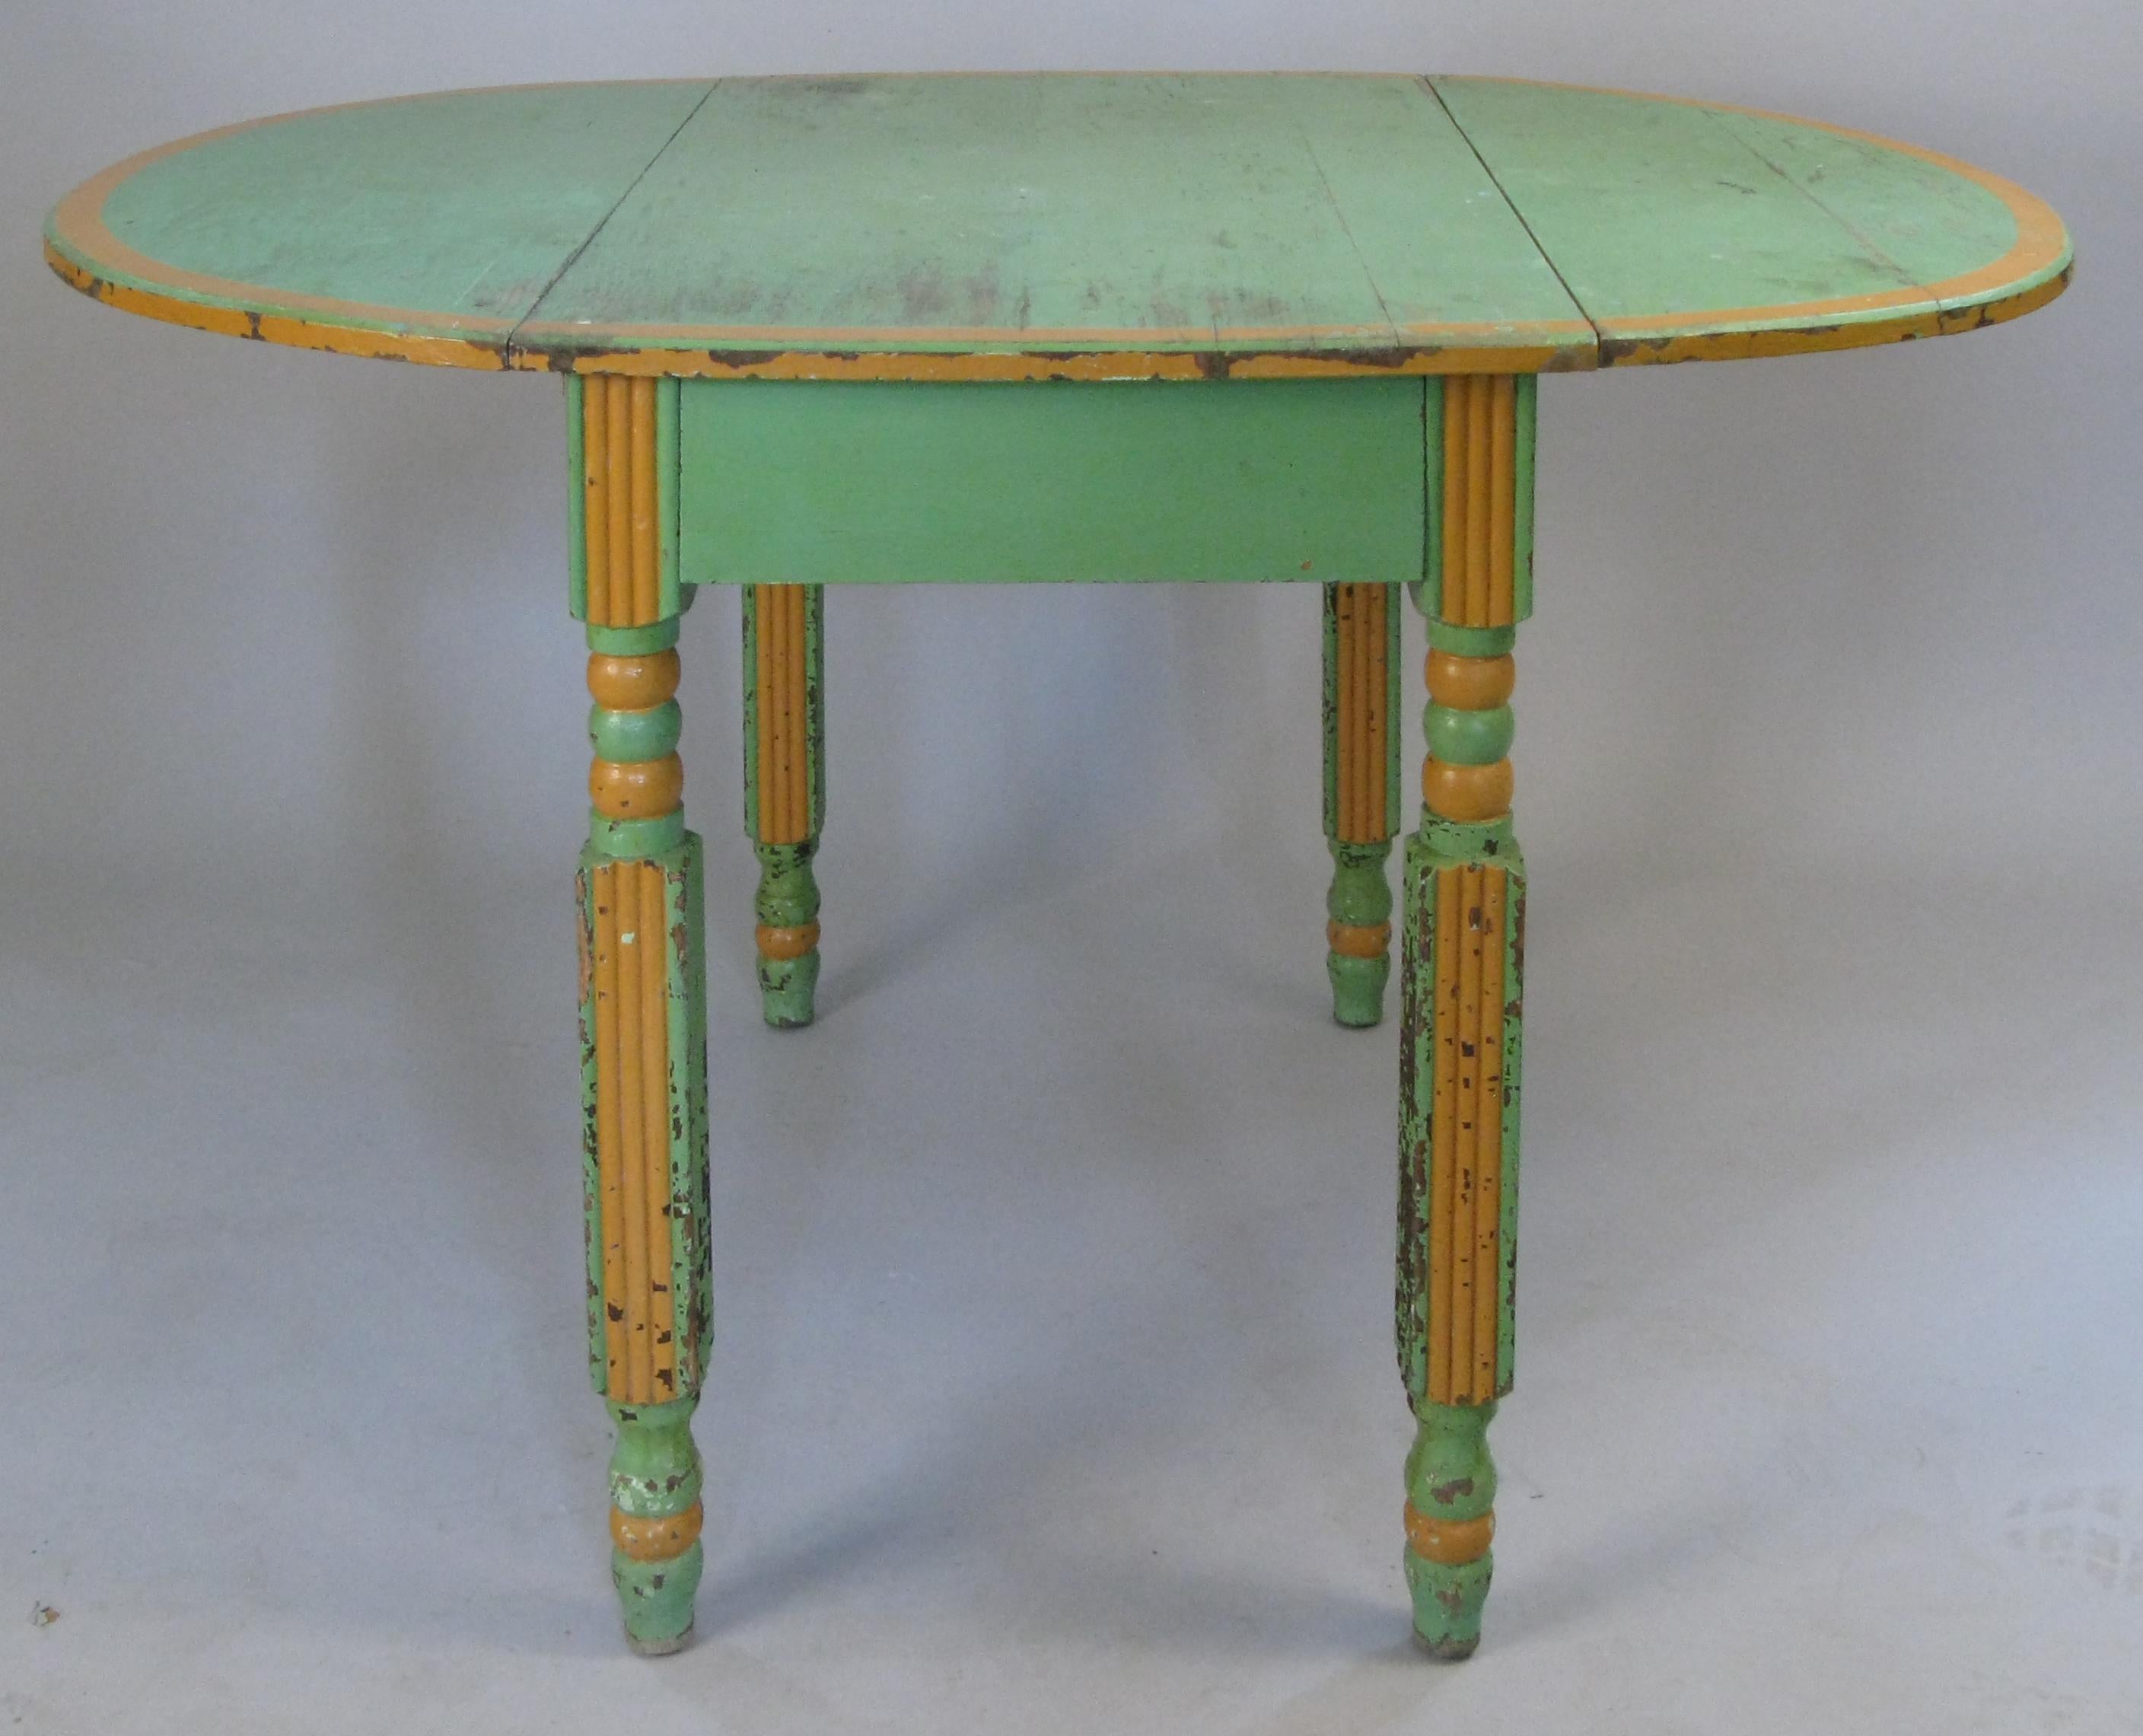 A very charming antique 1920s drop leaf dining table, in its original hand painted finish in light fern green with orange details. Turned legs and folding metal brackets to support the leafs when extended.